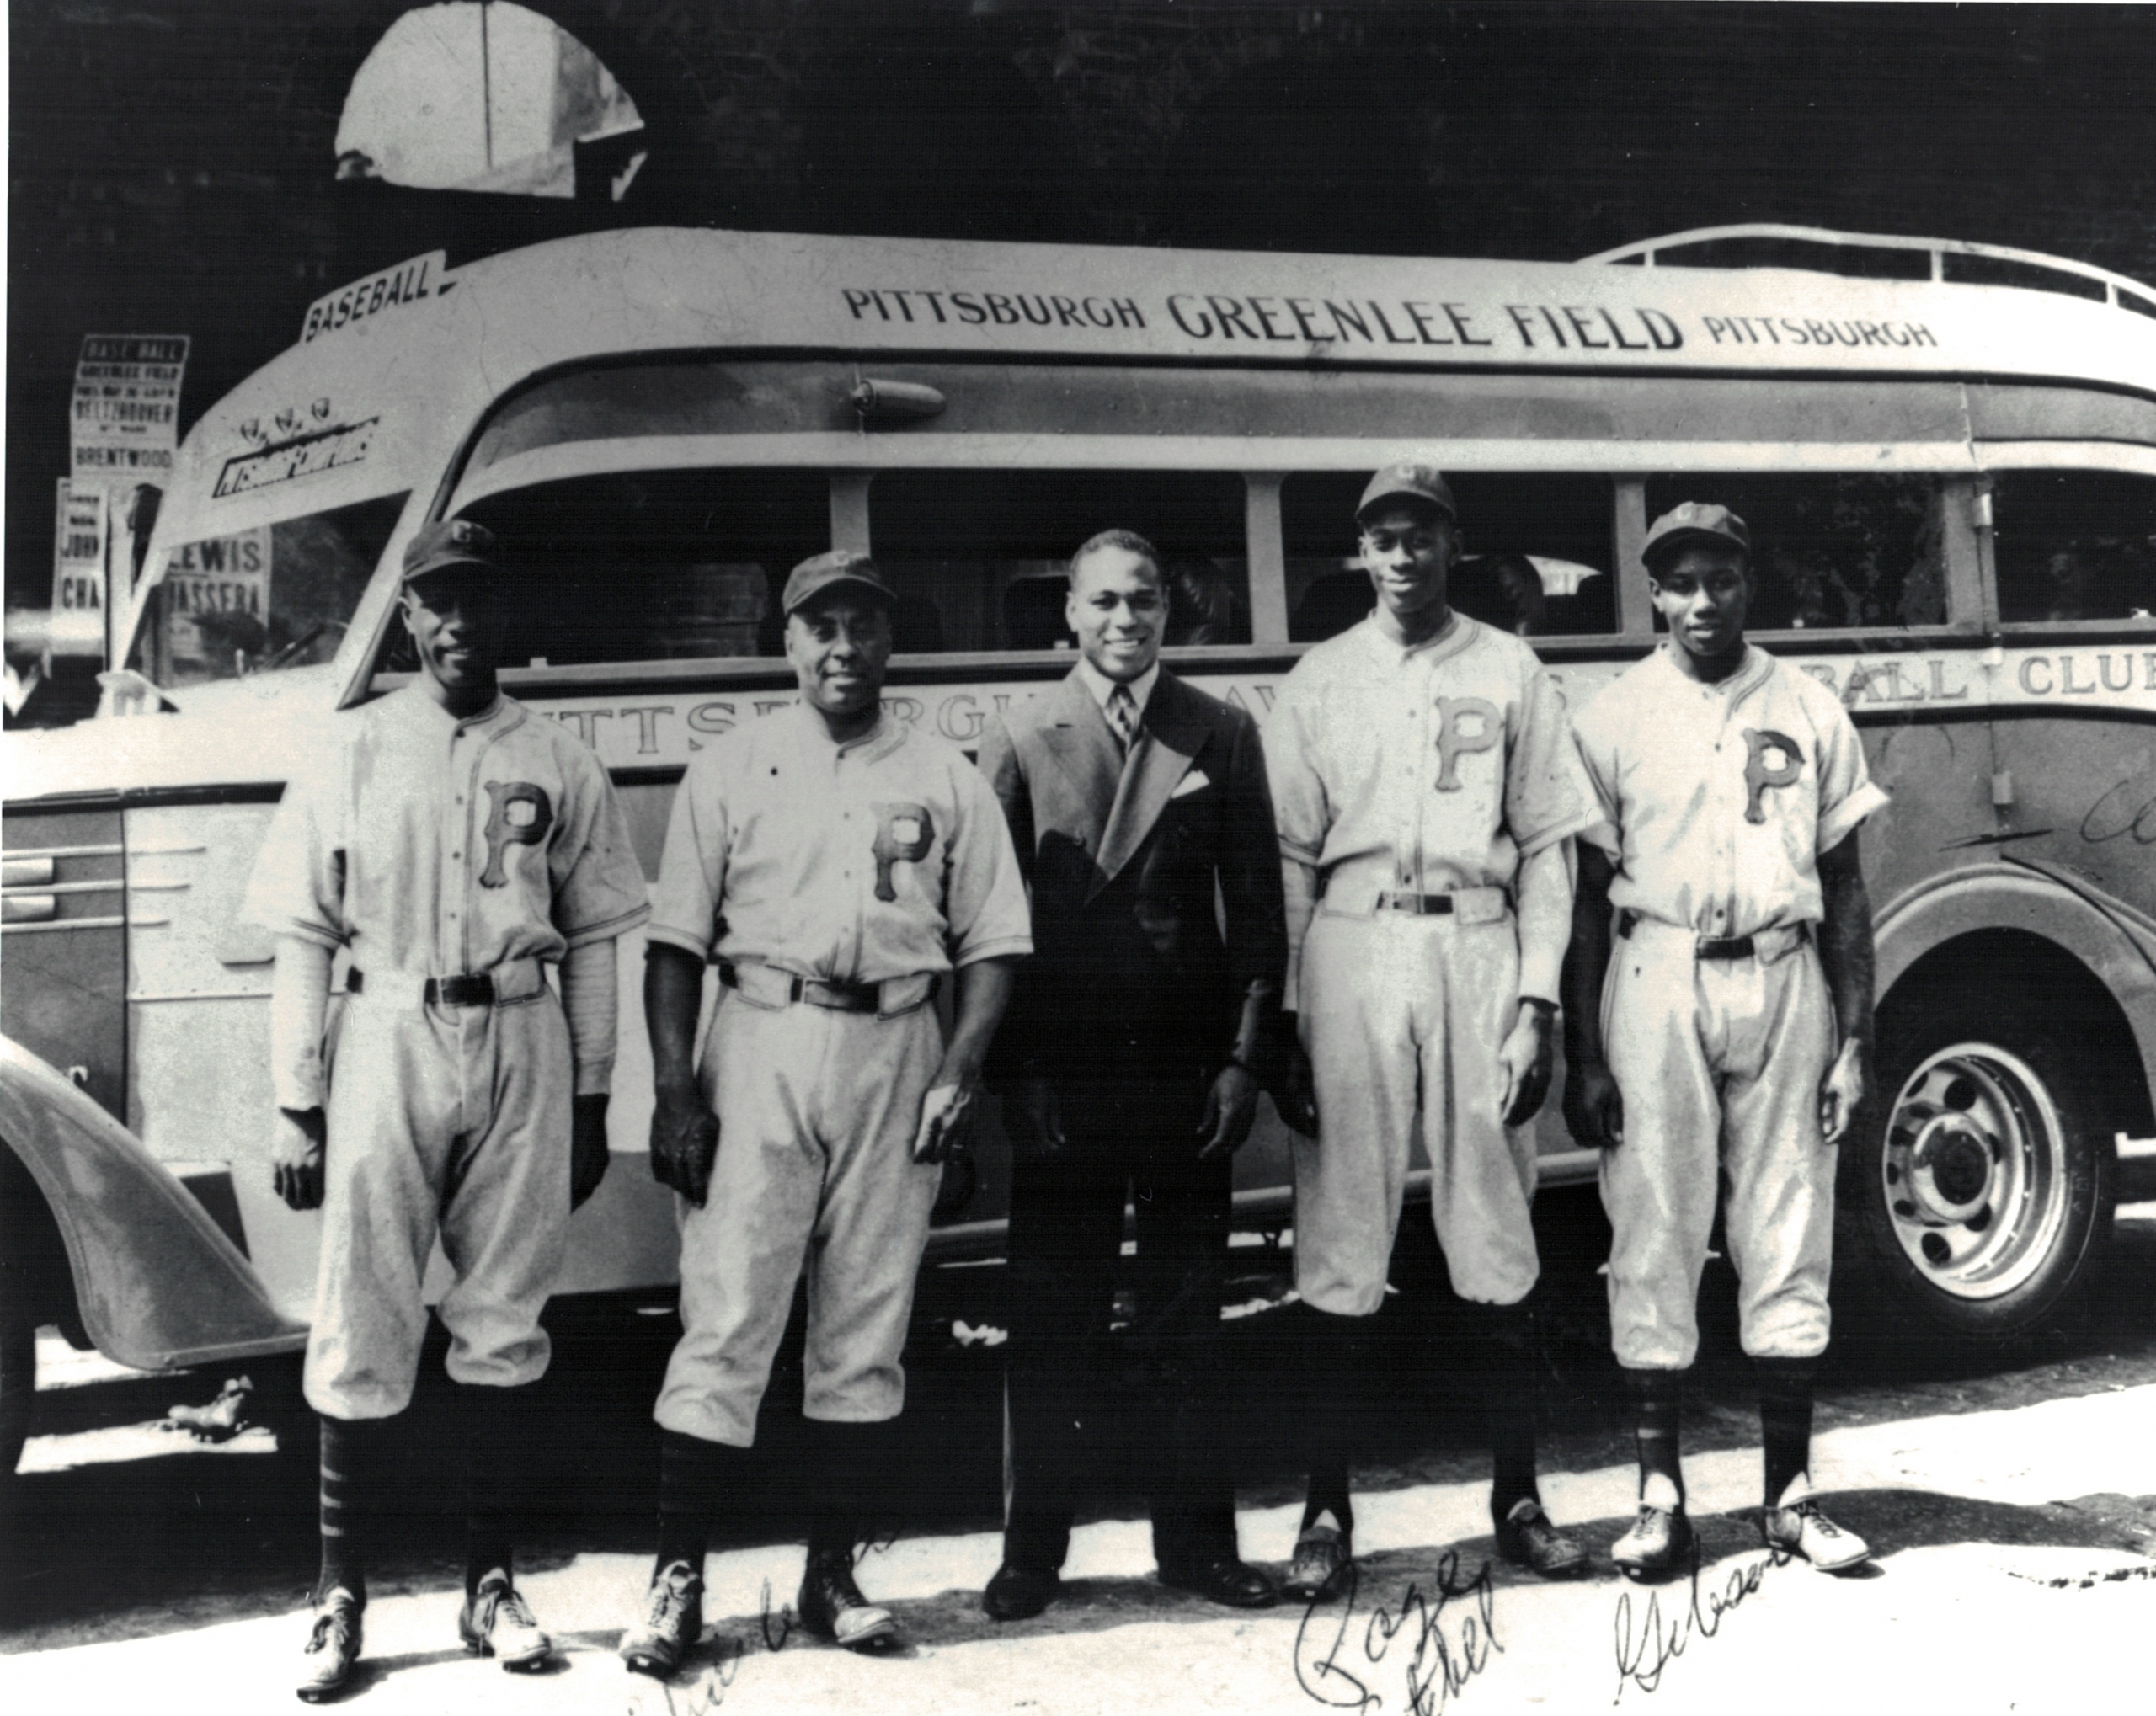 From left, Leroy Matlock, Oscar Charleston, boxer John Henry Lewis, Satchel Paige, and Josh Gibson pose in front of the team bus at Greenlee Field in Pittsburgh. (NOIRTECH RESEARCH, INC.)